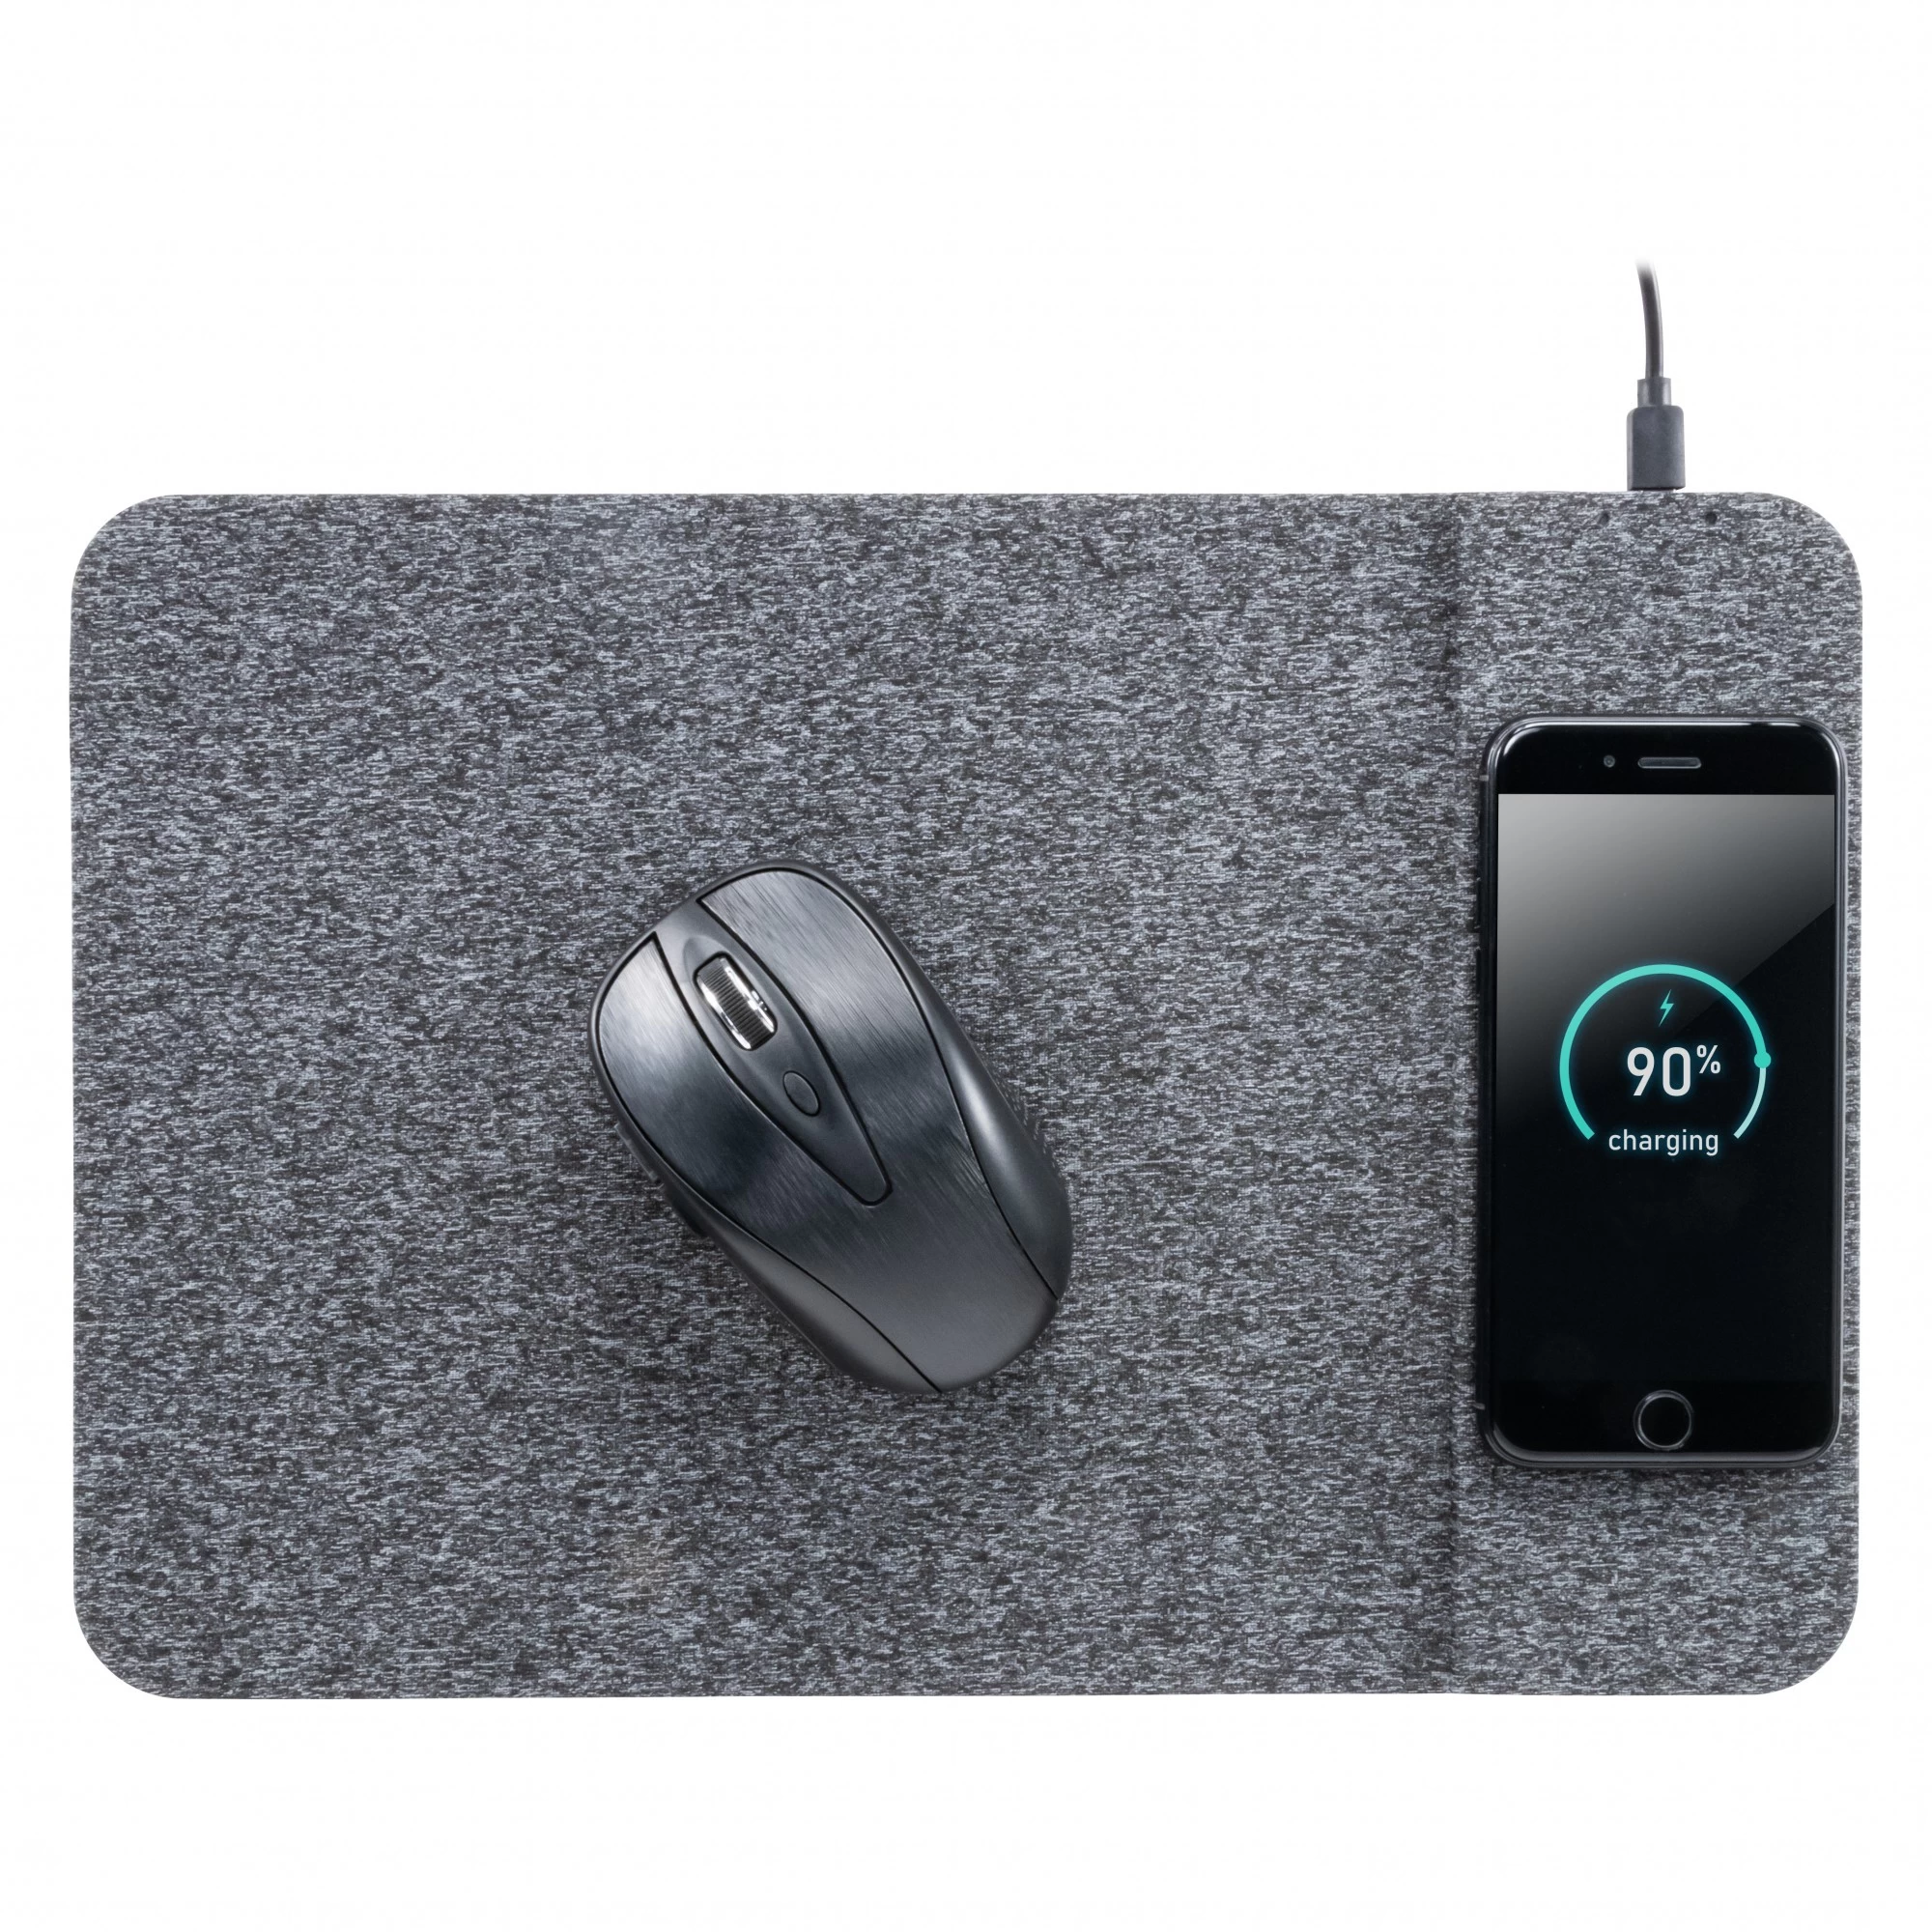 China Hot Selling 2 in 1 Fast Wireless Charger Mouse Pad with Customized Fabric on The Surface for Computer Games and Office Study Use (MH-D85) manufacturer